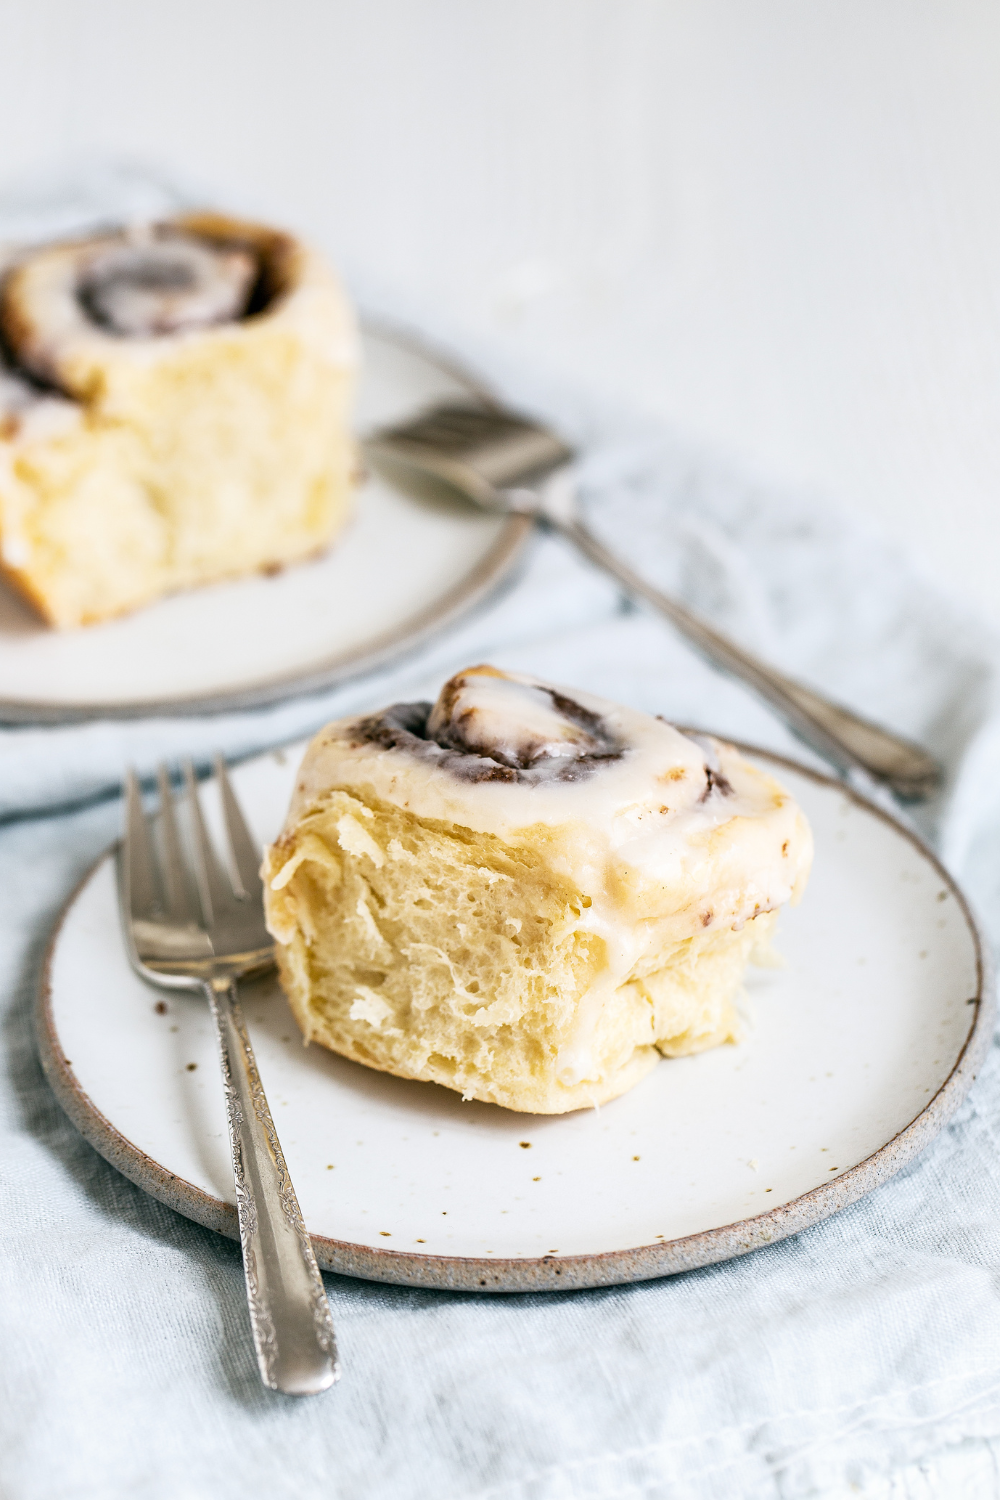 Gooey Cinnamon Rolls on plates with forks, ready to be served